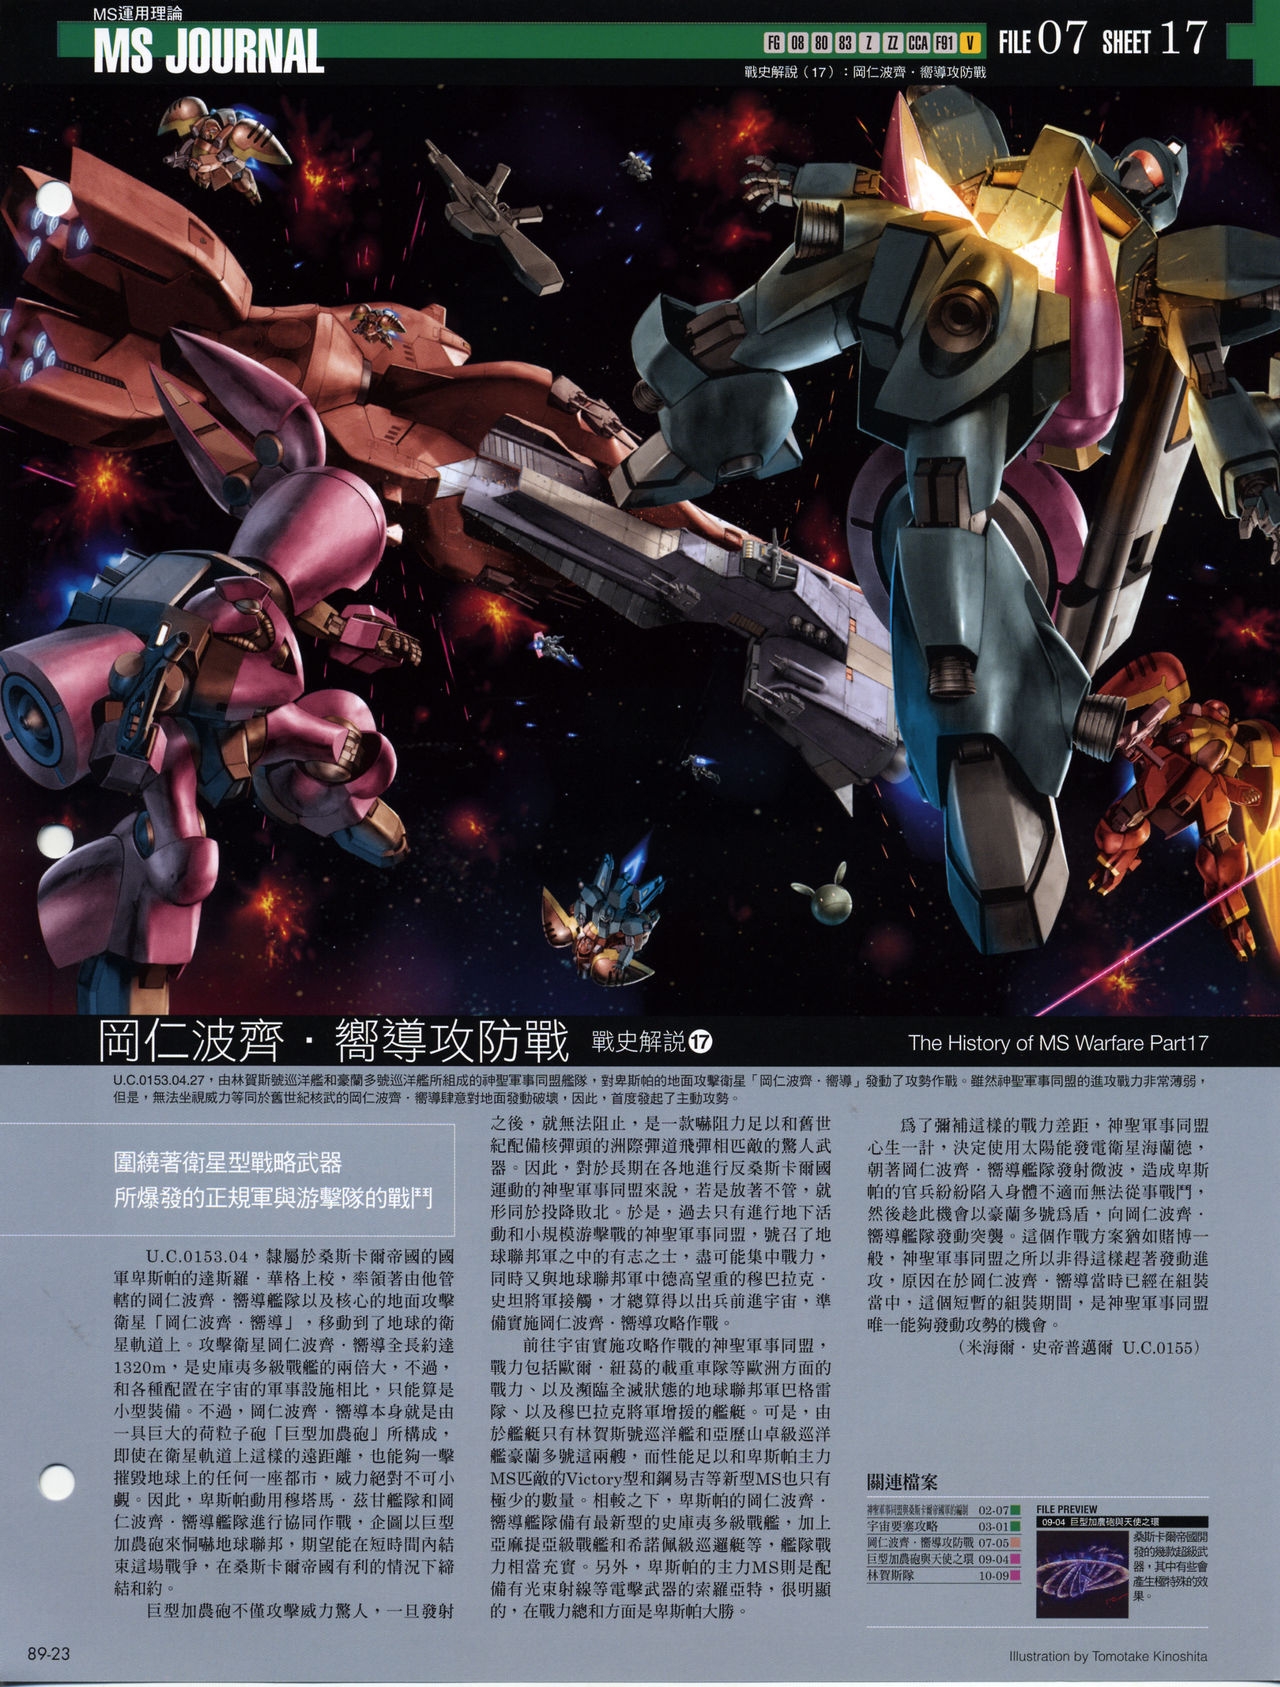 The Official Gundam Fact File - 089 [Chinese] 24